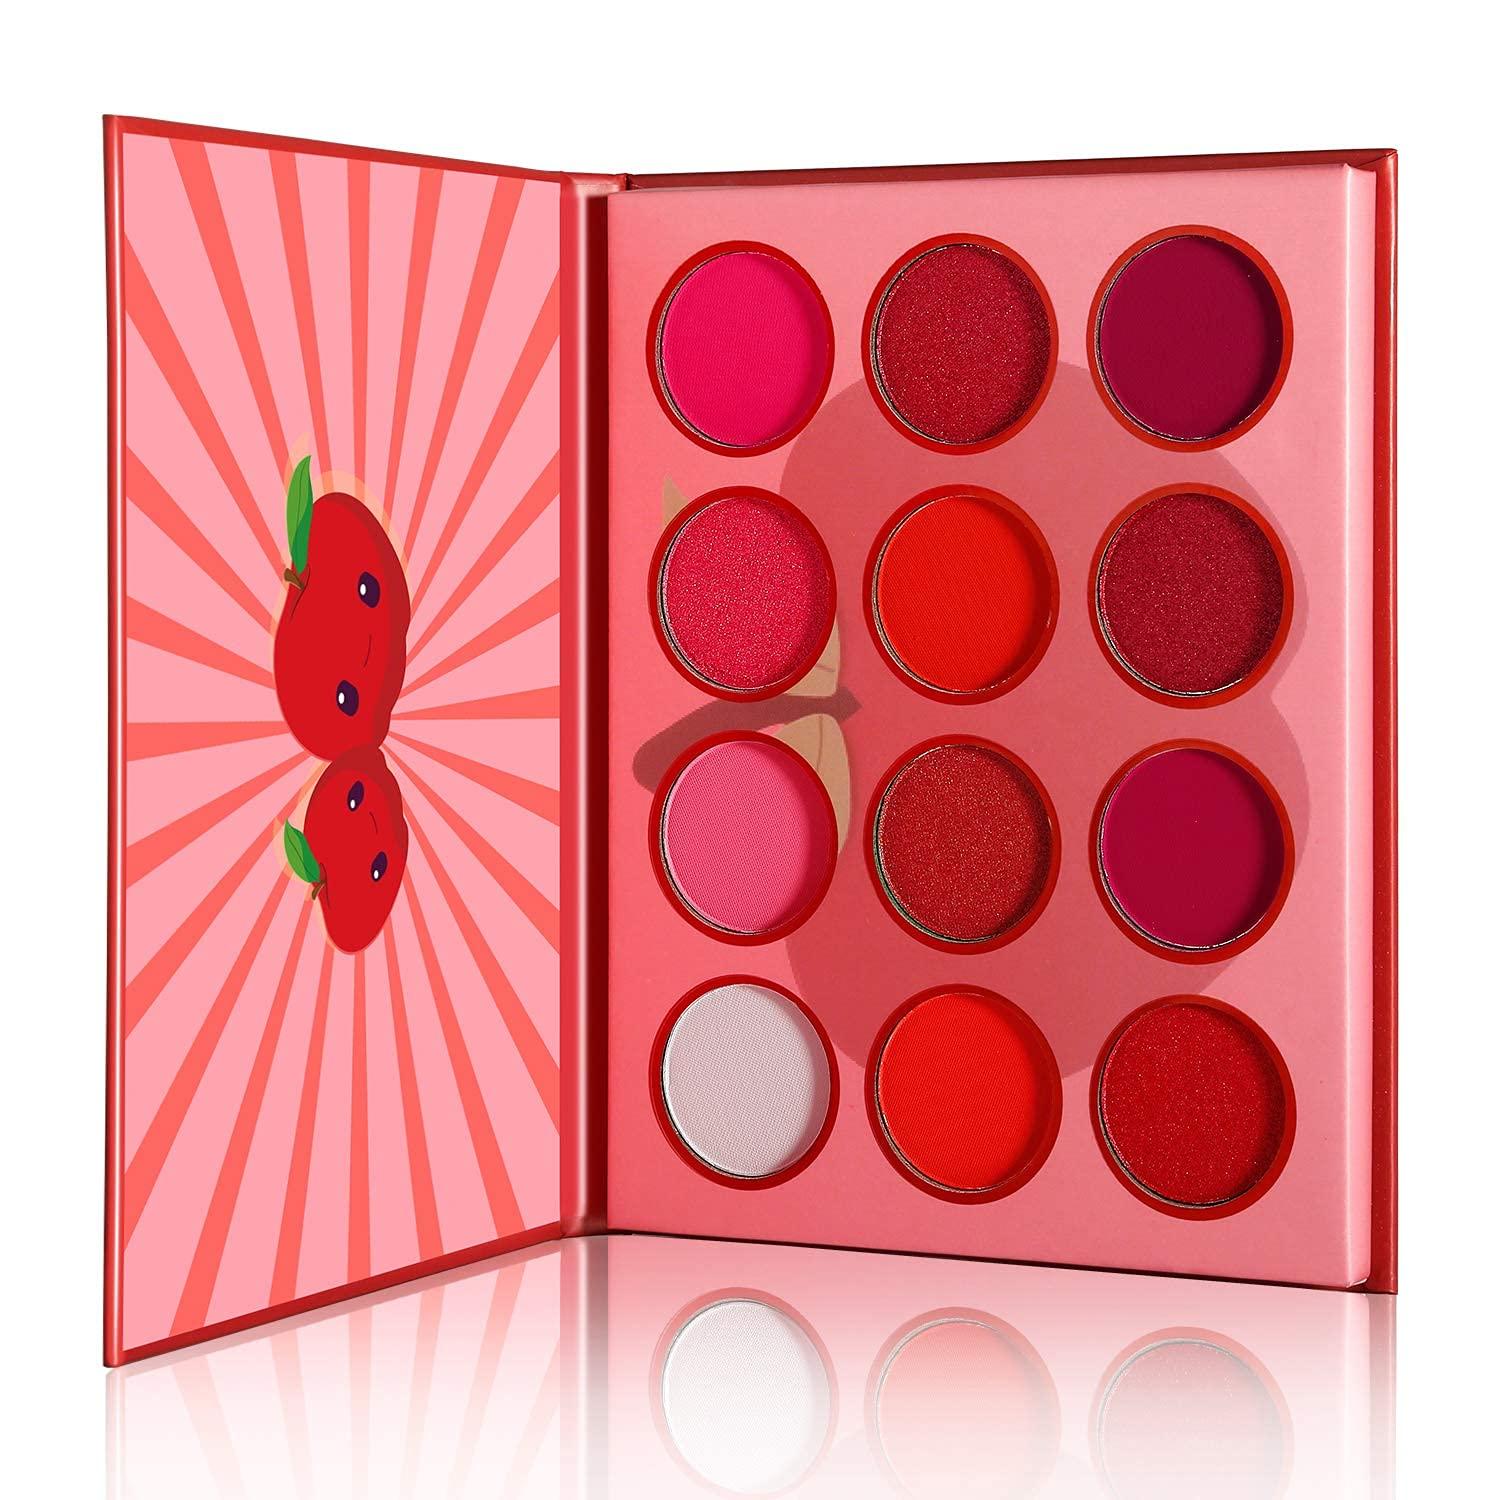 Professional Red Rose Eyeshadow Palette Highly Pigmented, DE'LANCI 12 Color  Matte Shimmer Eye Shadow Makeup, Cute Mini Travel Size, Blendable & Long  Lasting Shade for Christmas Gifts 